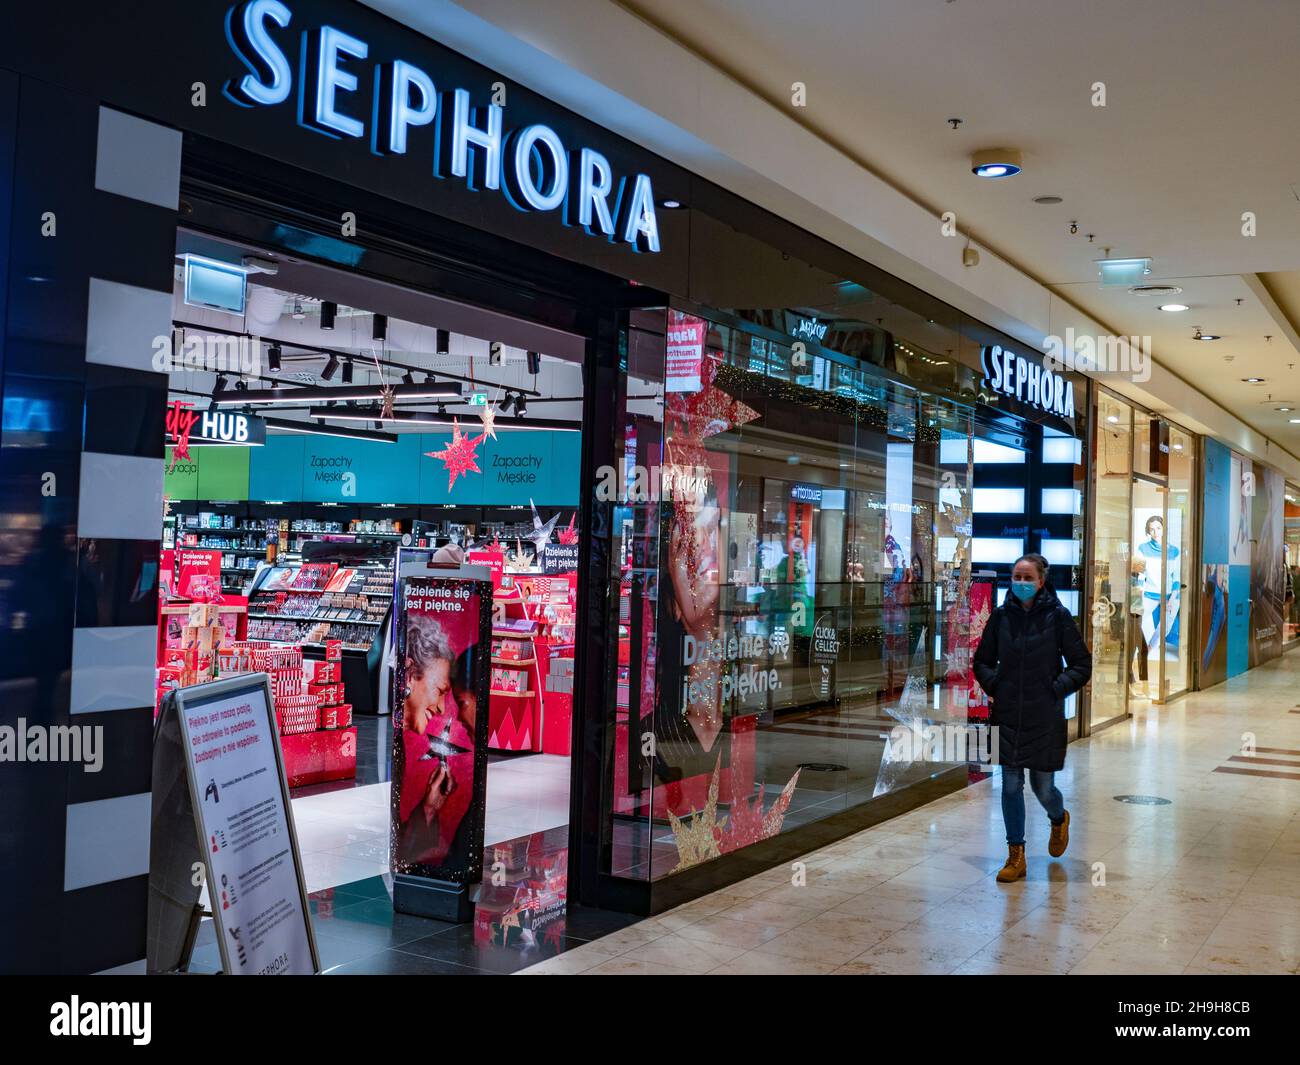 Page 2 - Sephora Retail Shopping Shop High Resolution Stock Photography and  Images - Alamy